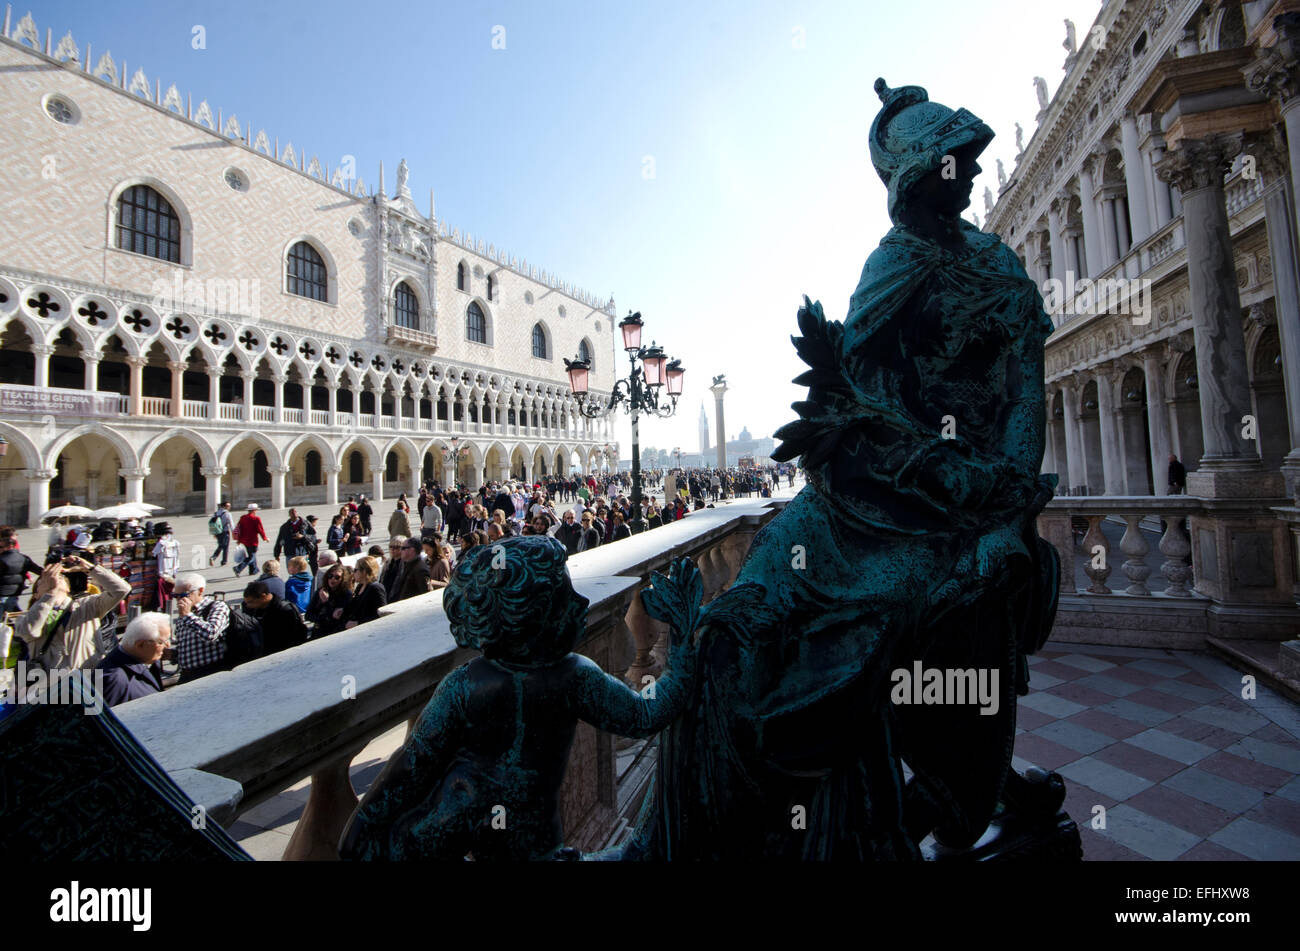 Statue at the entrance to the St. Mark's Campanile showing Doge's Palace in Venice, Italy Stock Photo